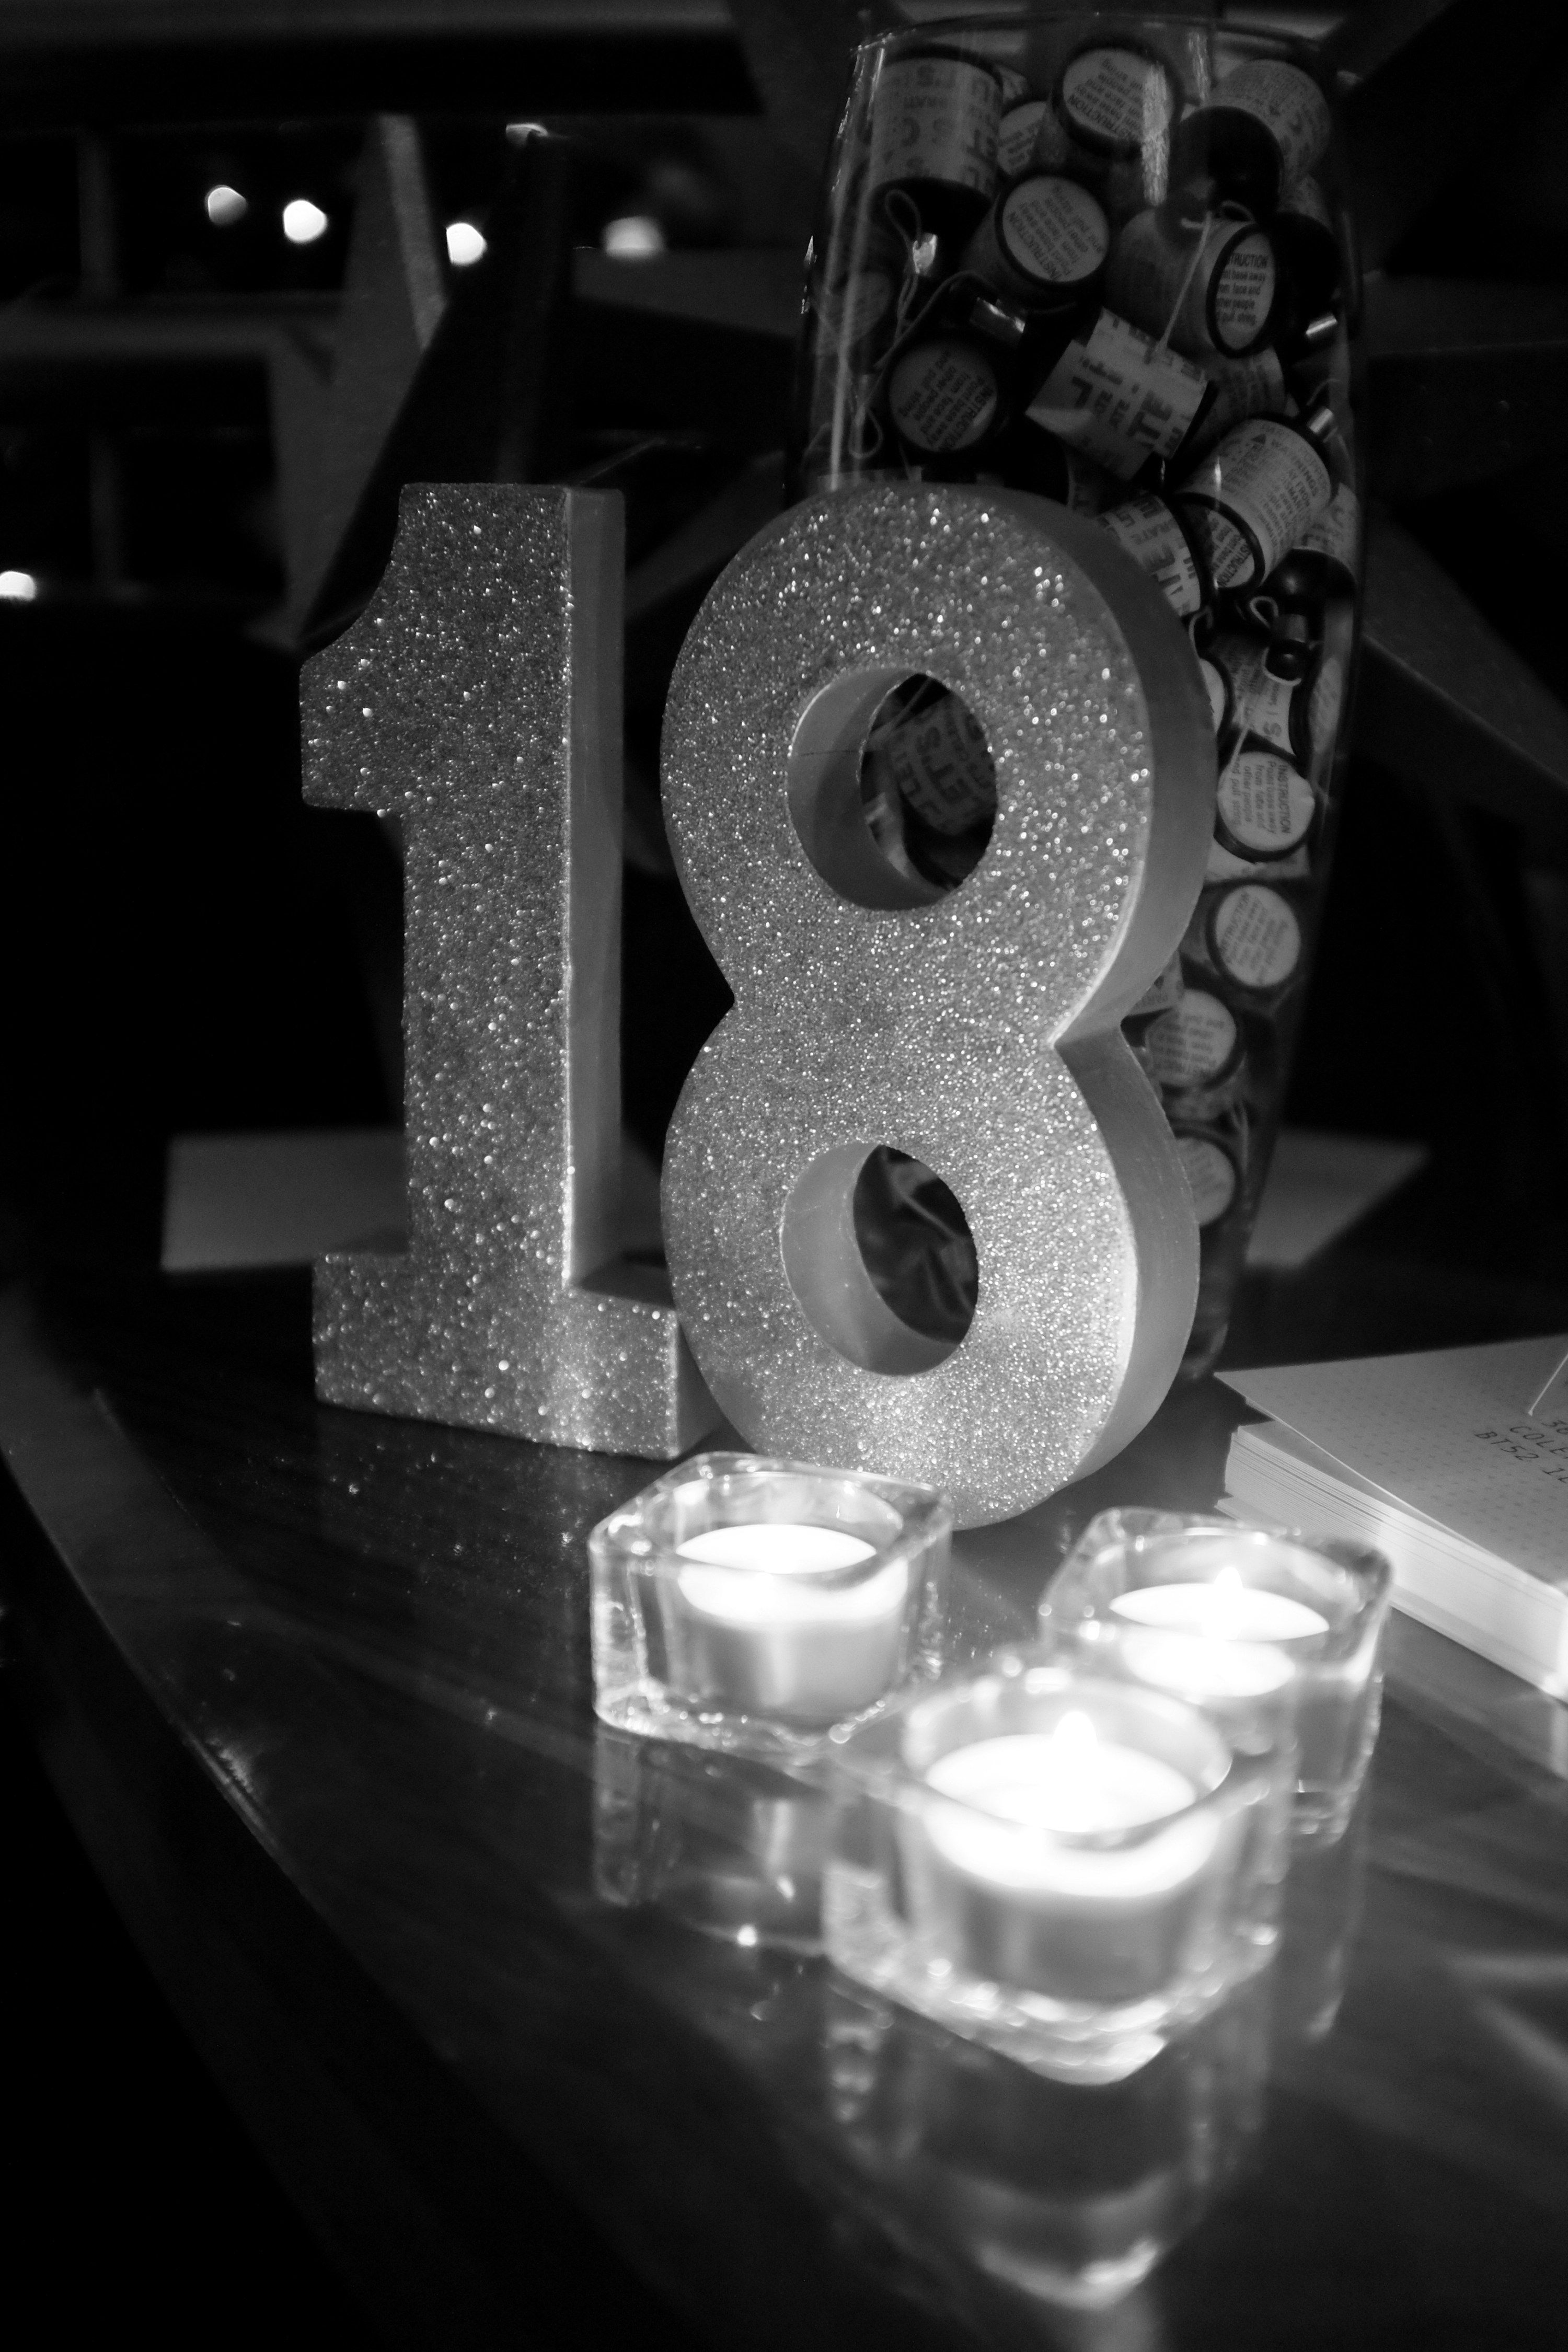 Some creative ideas for planning an 18th birthday partyth birthday party, 18th birthday decorations, 18th birthday